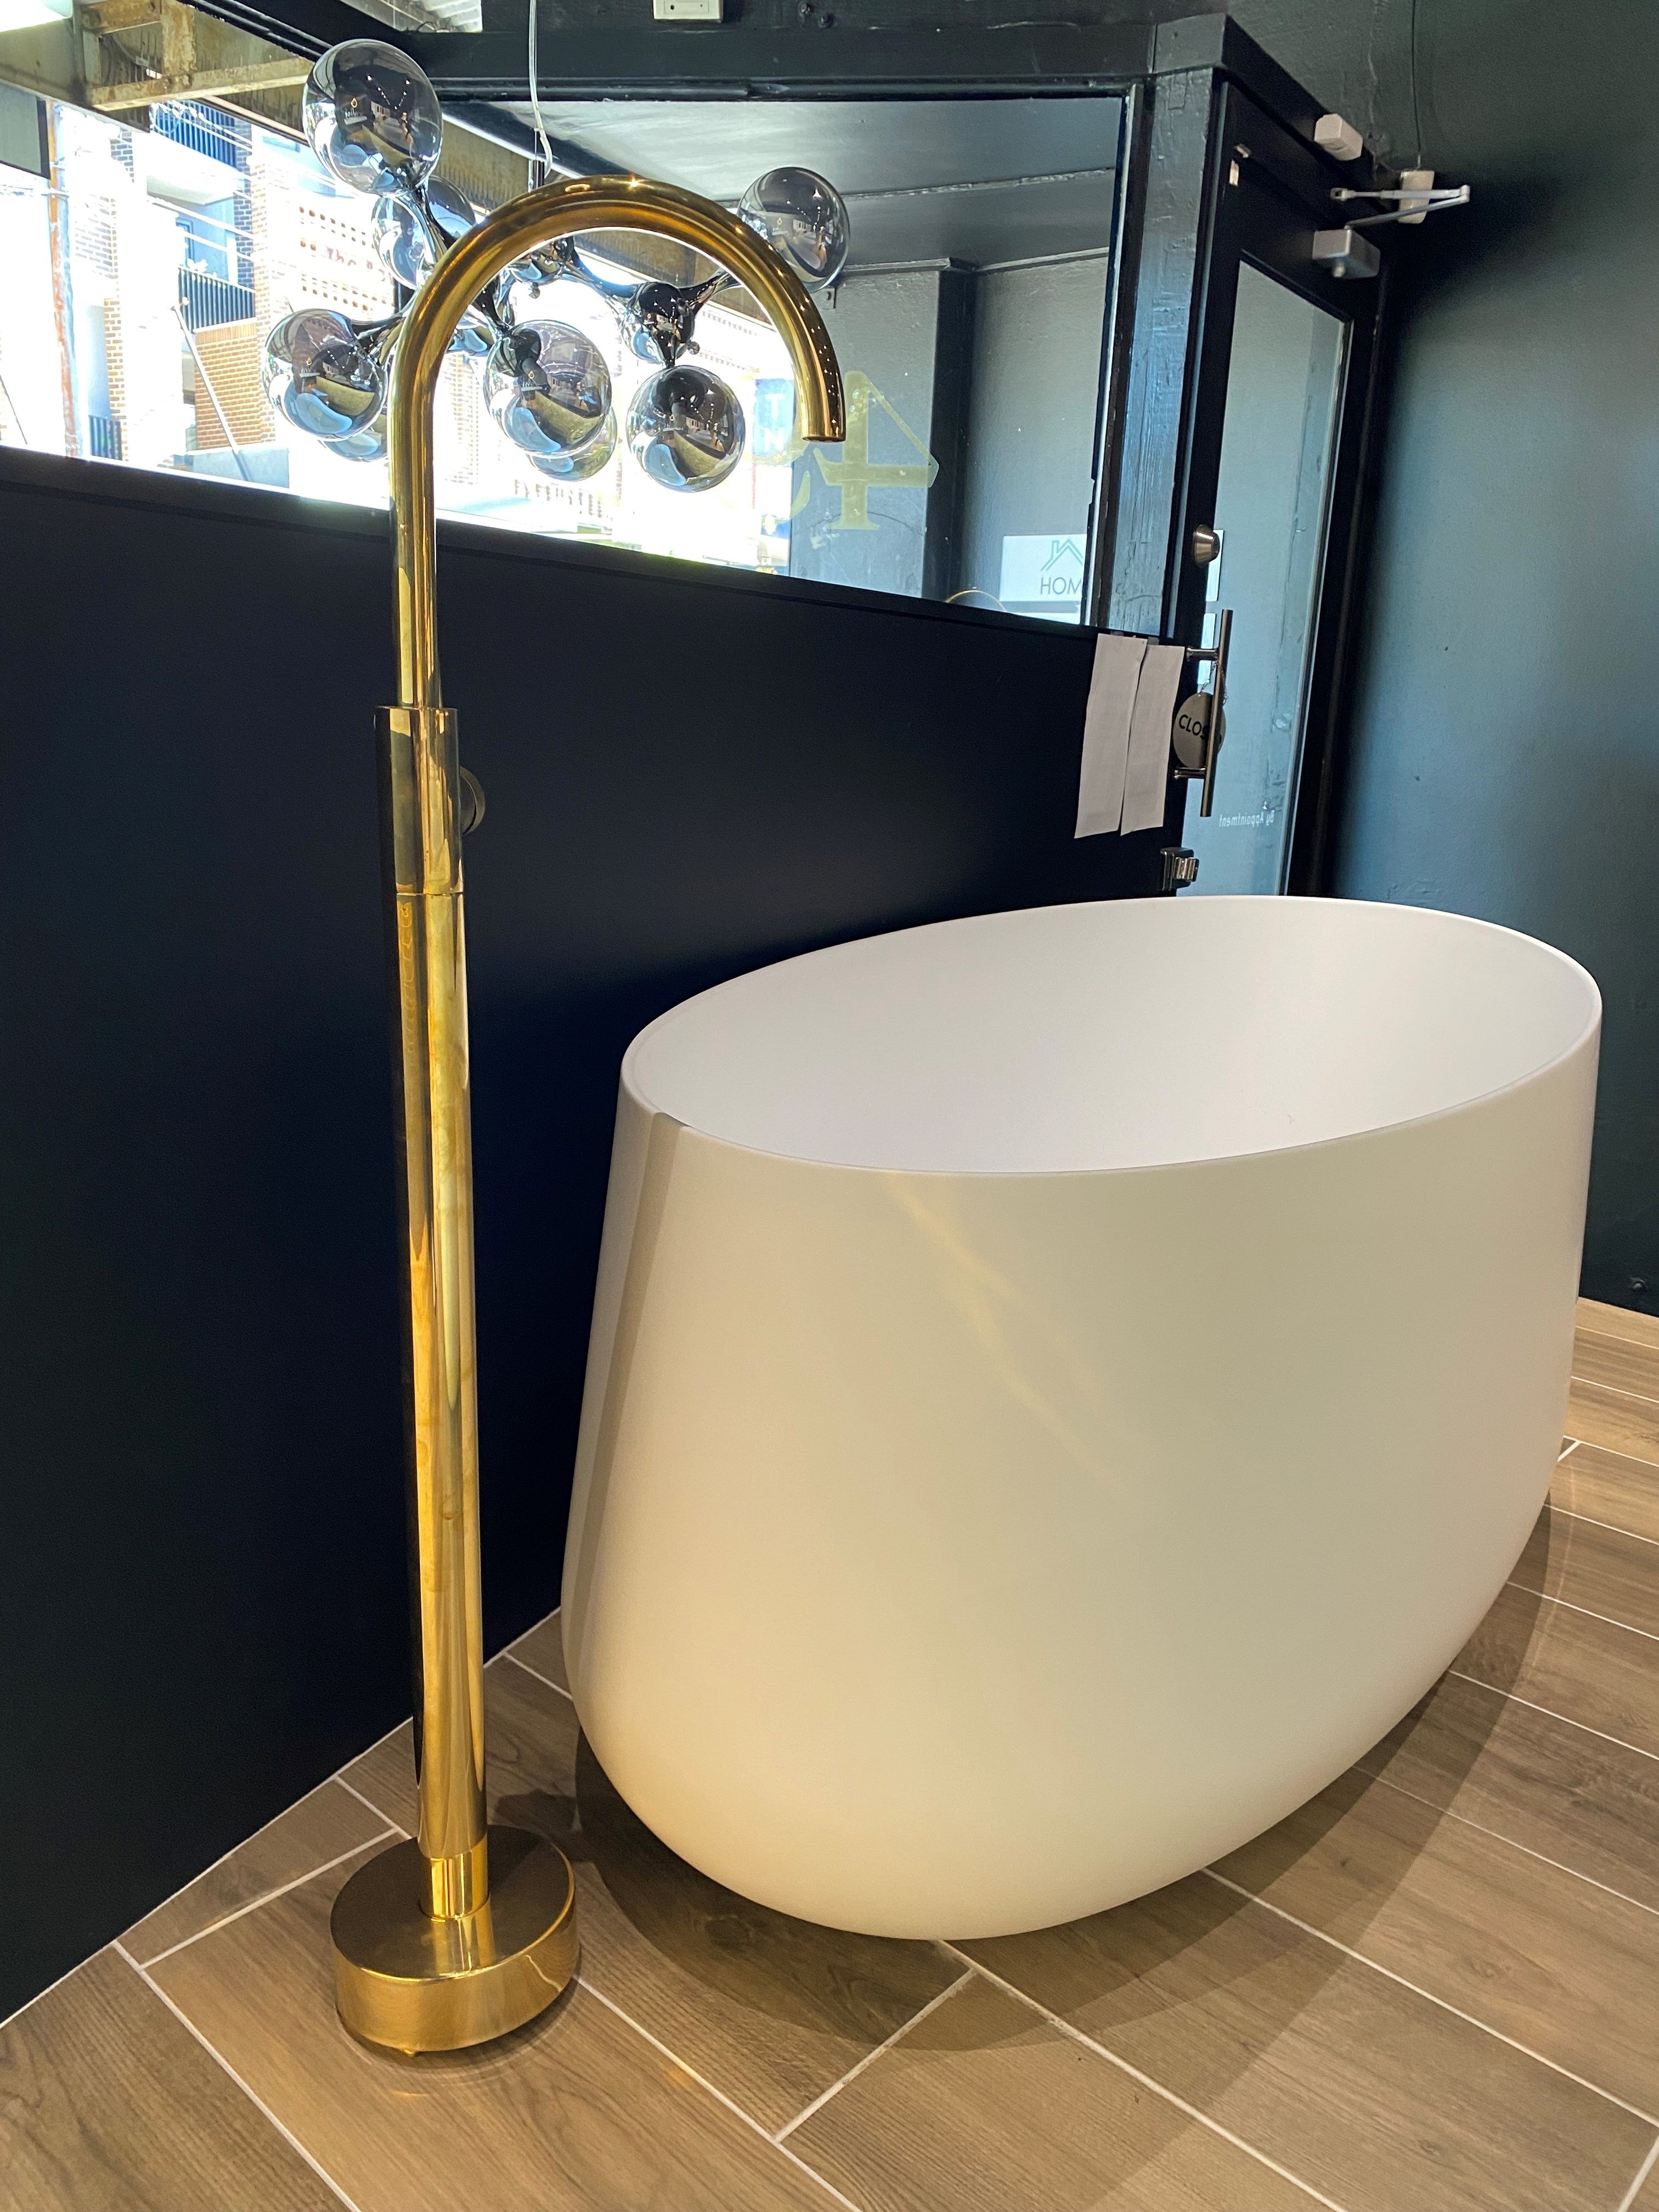 Ex-Display Bondi Floor-Mounted Bath Spout with Mixer in Raw Brass